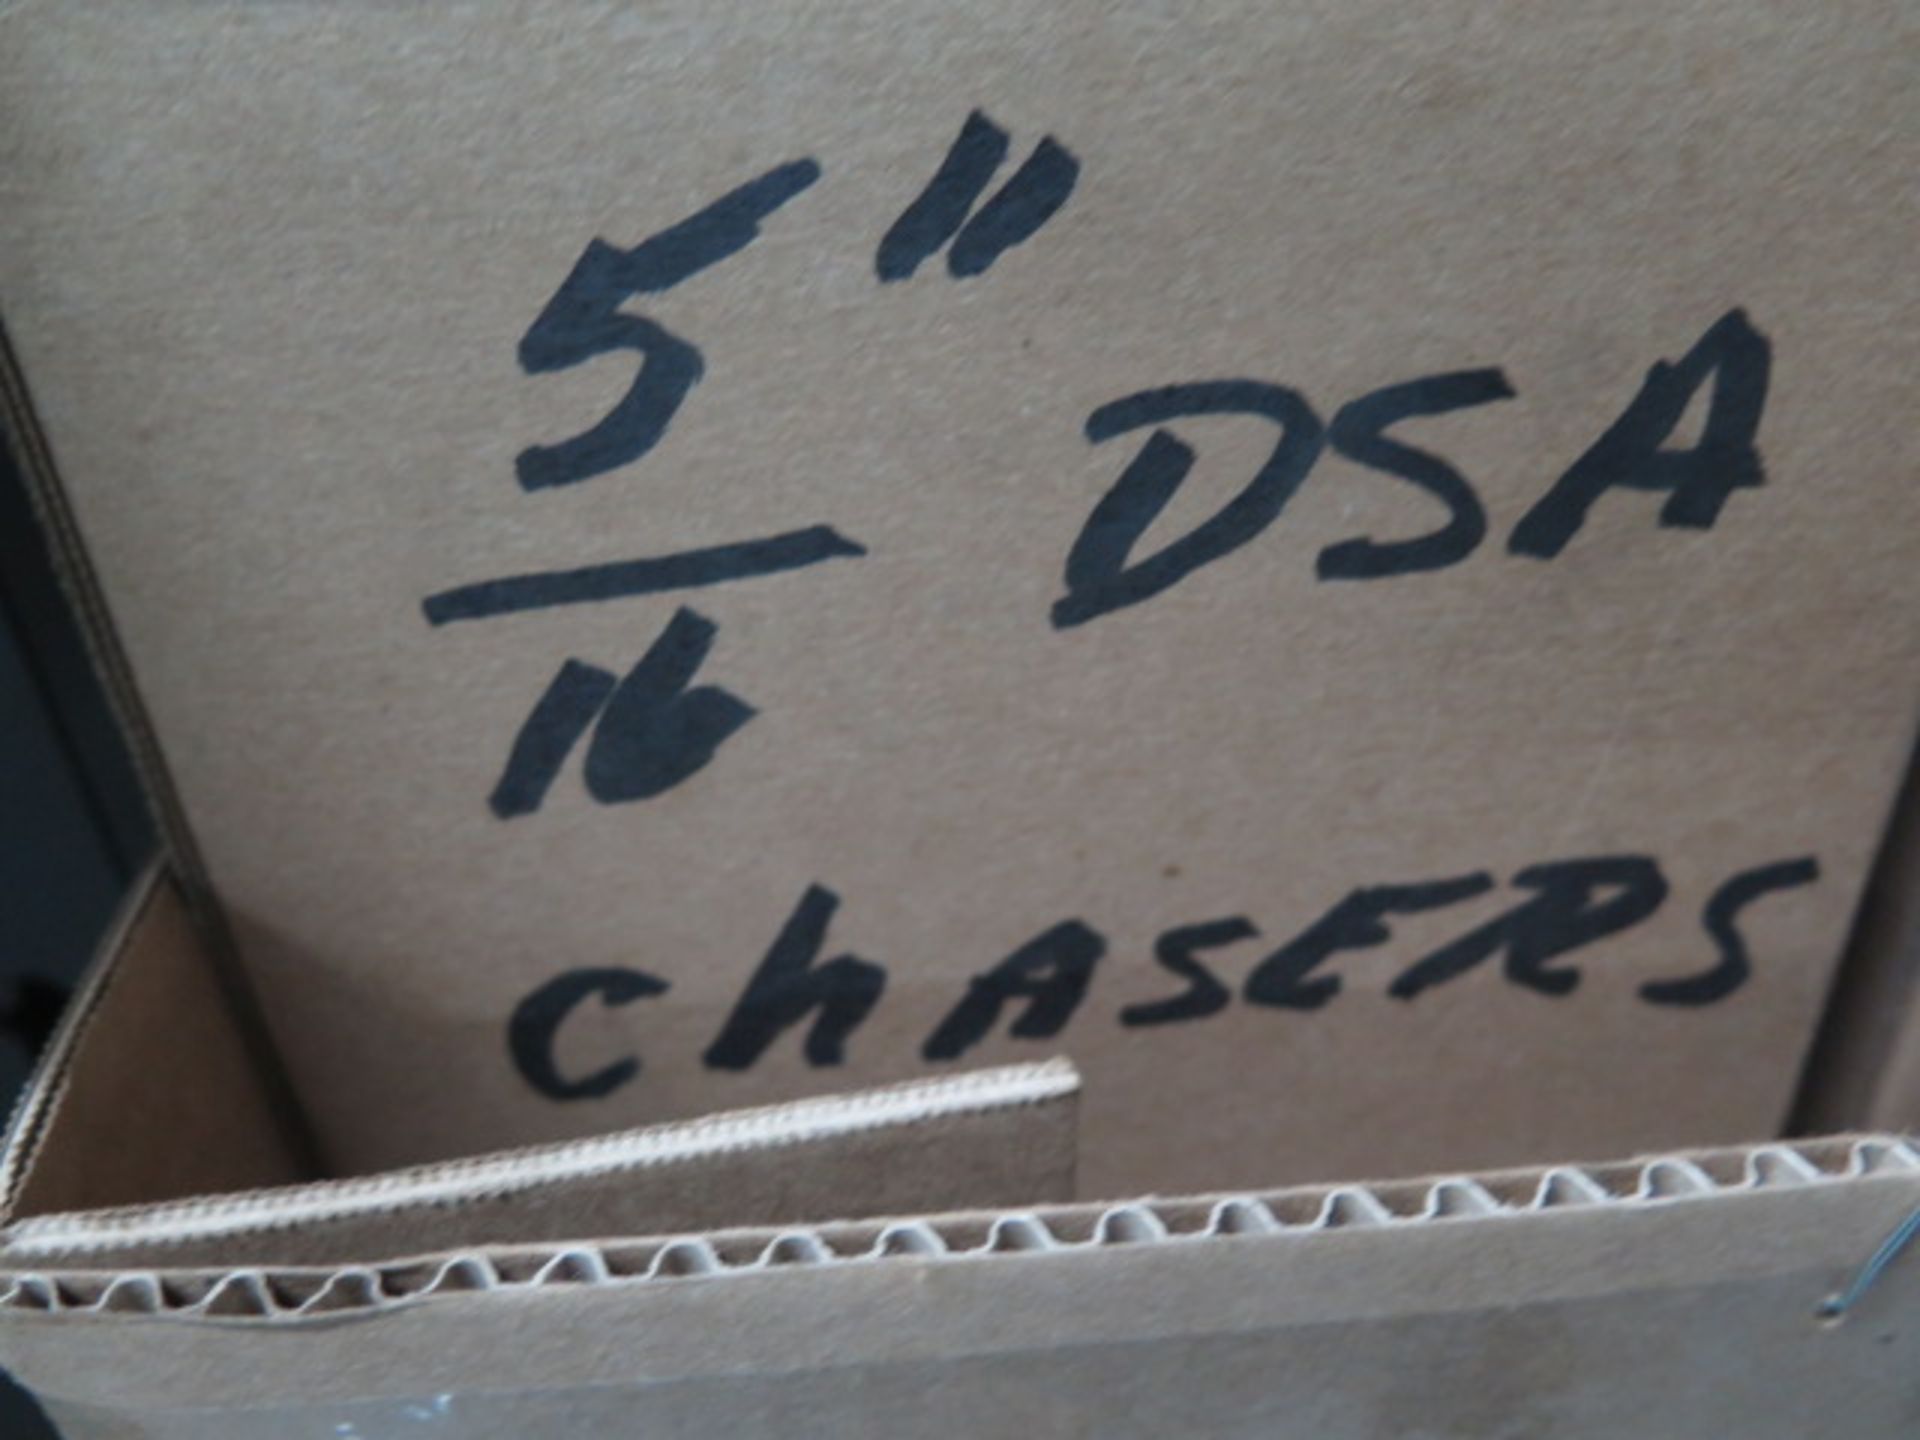 Thread Chasers (SOLD AS-IS - NO WARRANTY) - Image 6 of 7